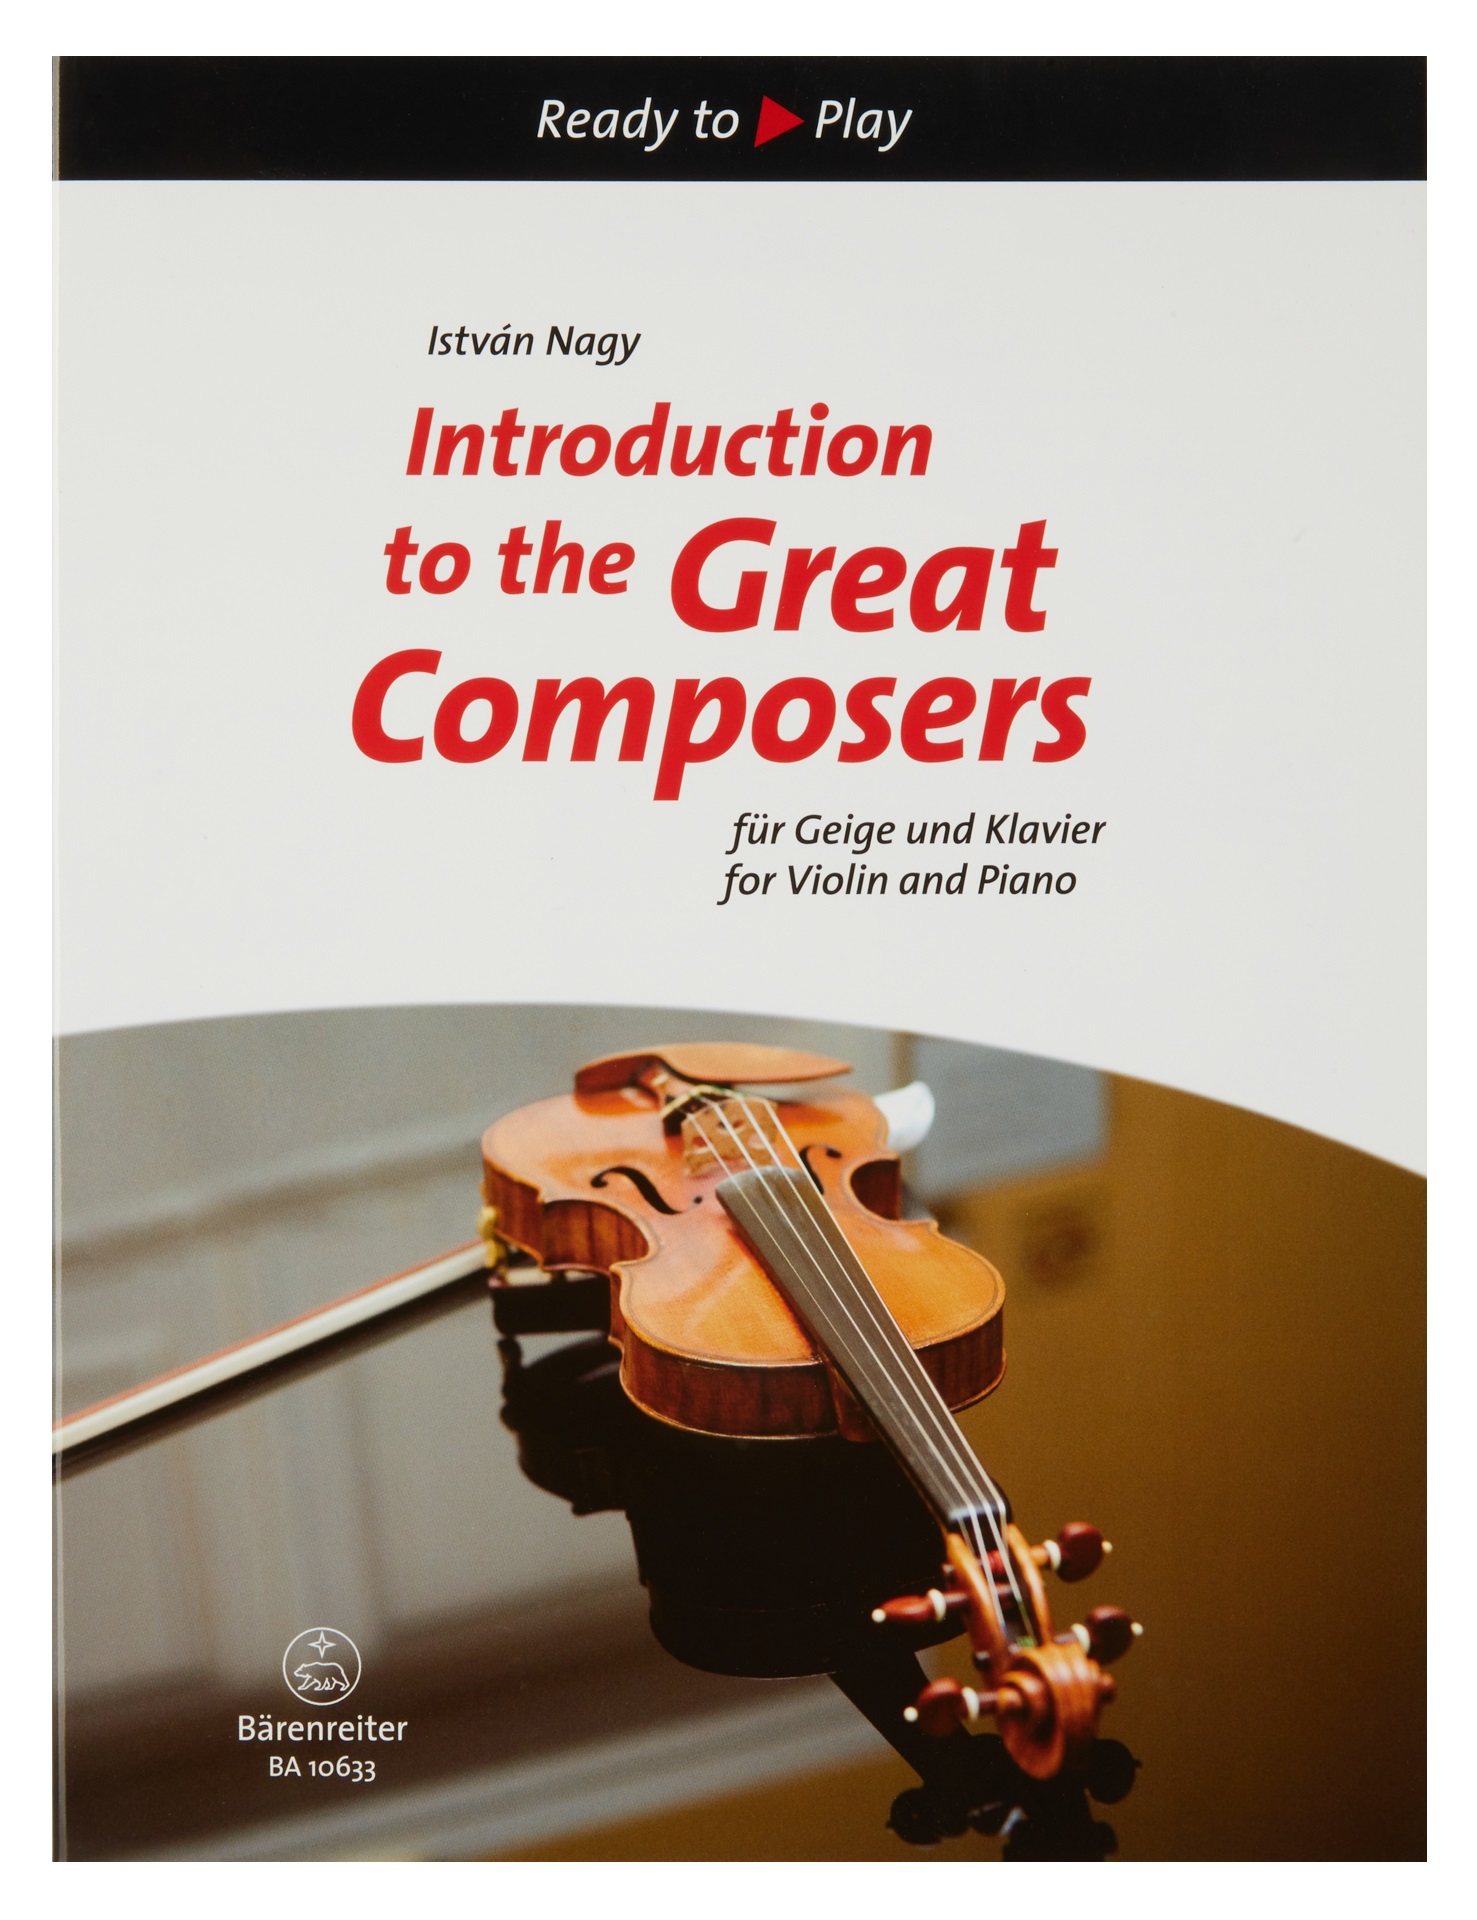 Fotografie Bärenreiter Indroduction to the Great Composers for Violin and Piano